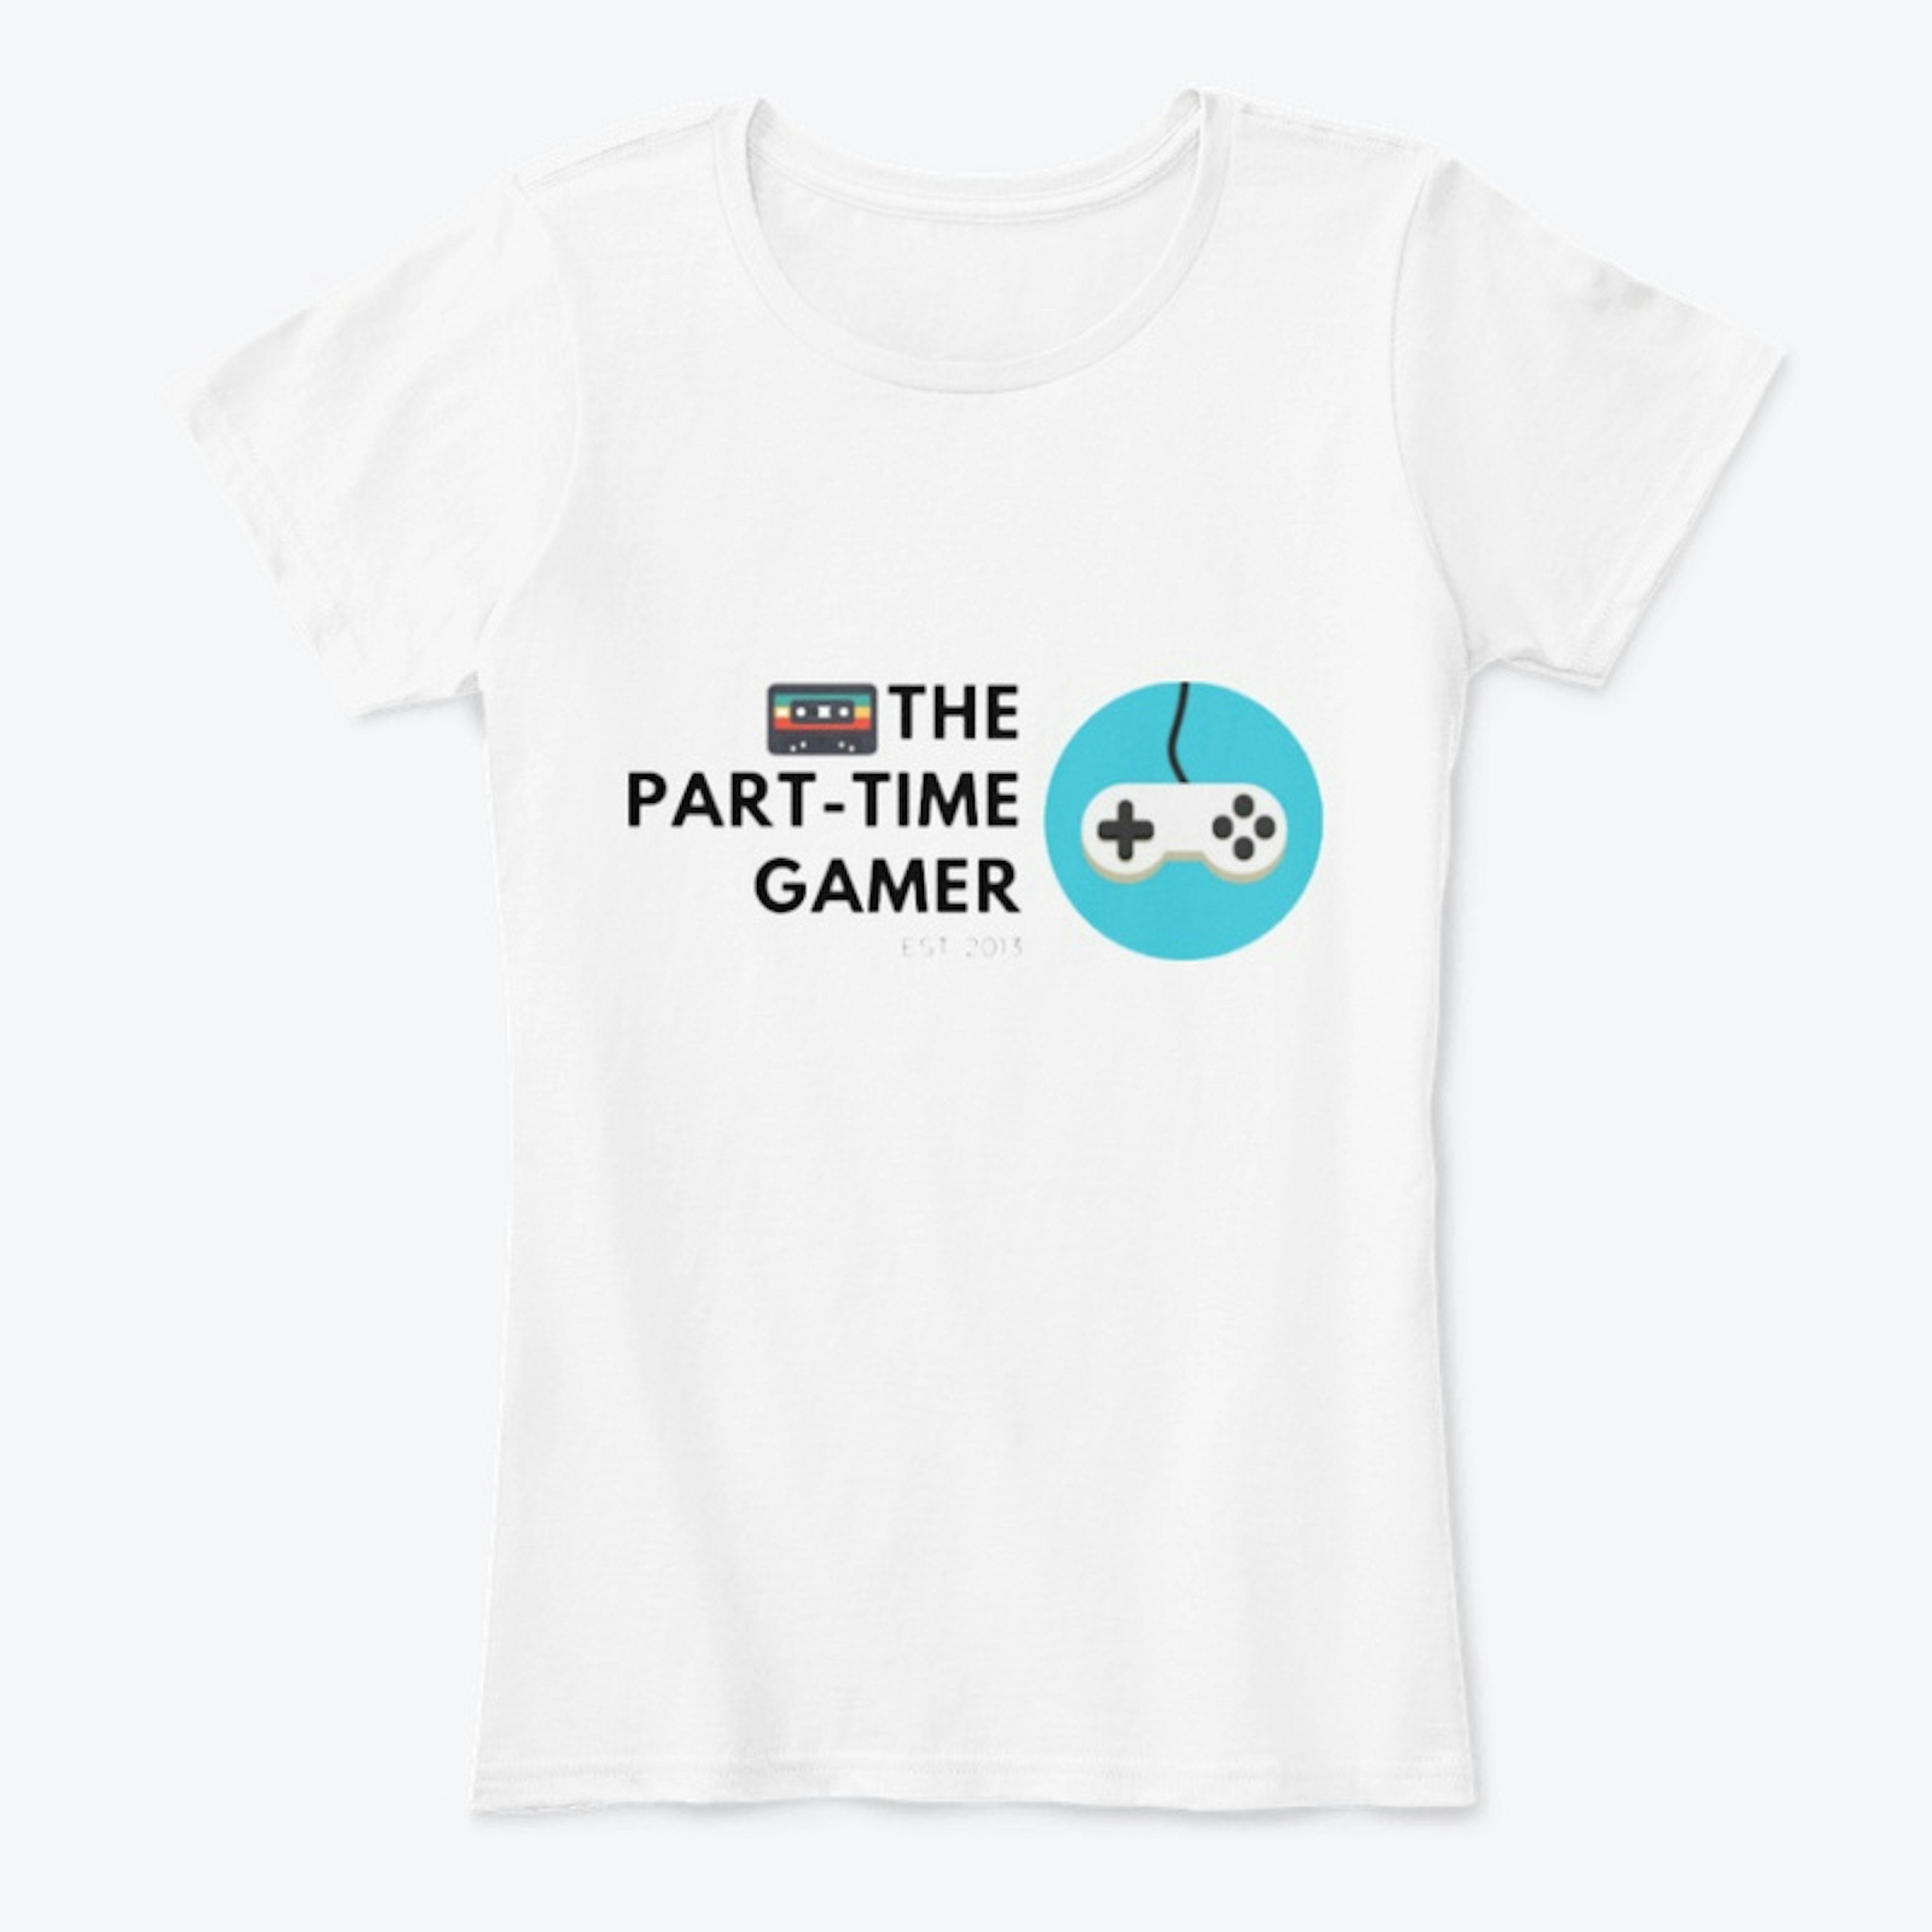 The Part-Time Gamer Collection